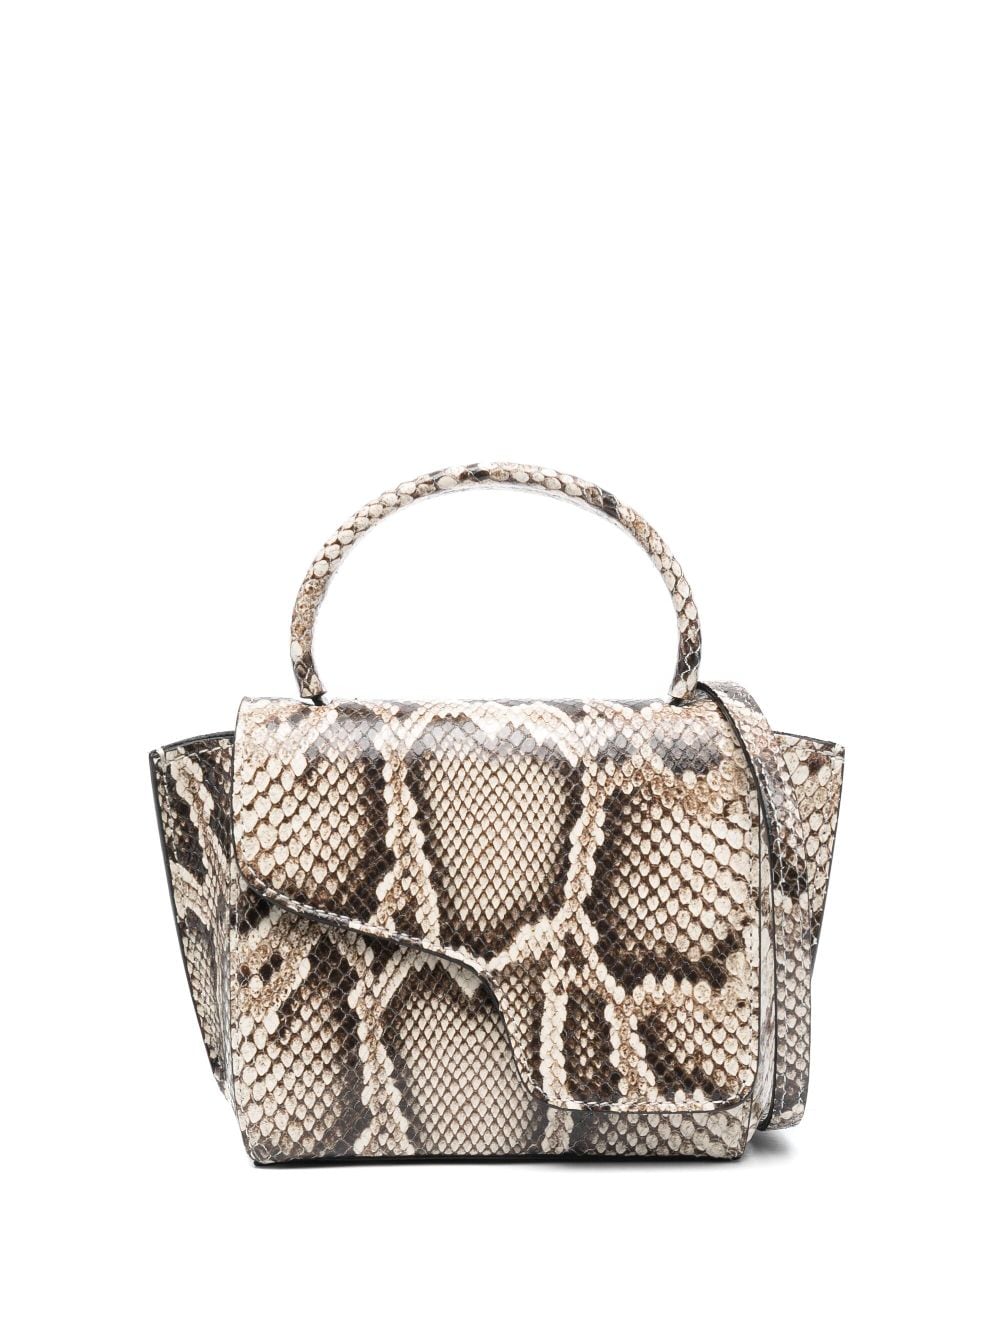 ATP Atelier snakeskin-effect Leather Tote Bag - Farfetch